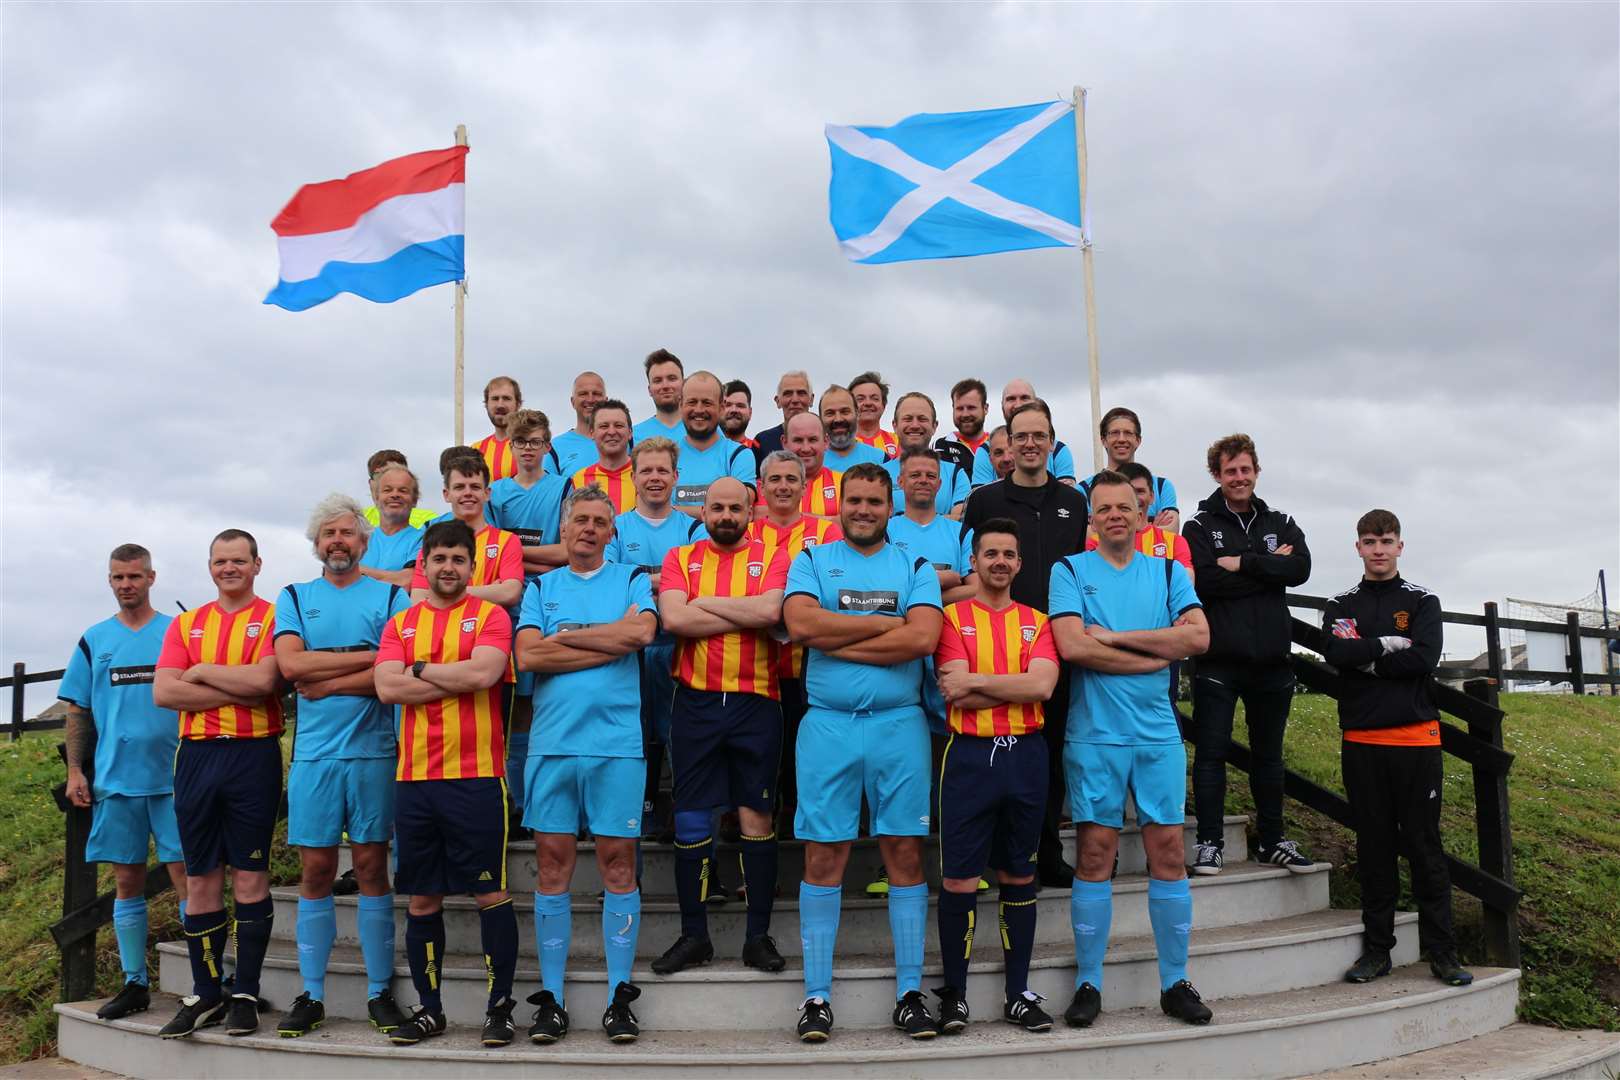 Players from John O'Groats and FC Staantribune before Saturday's challenge match at Folke Park.